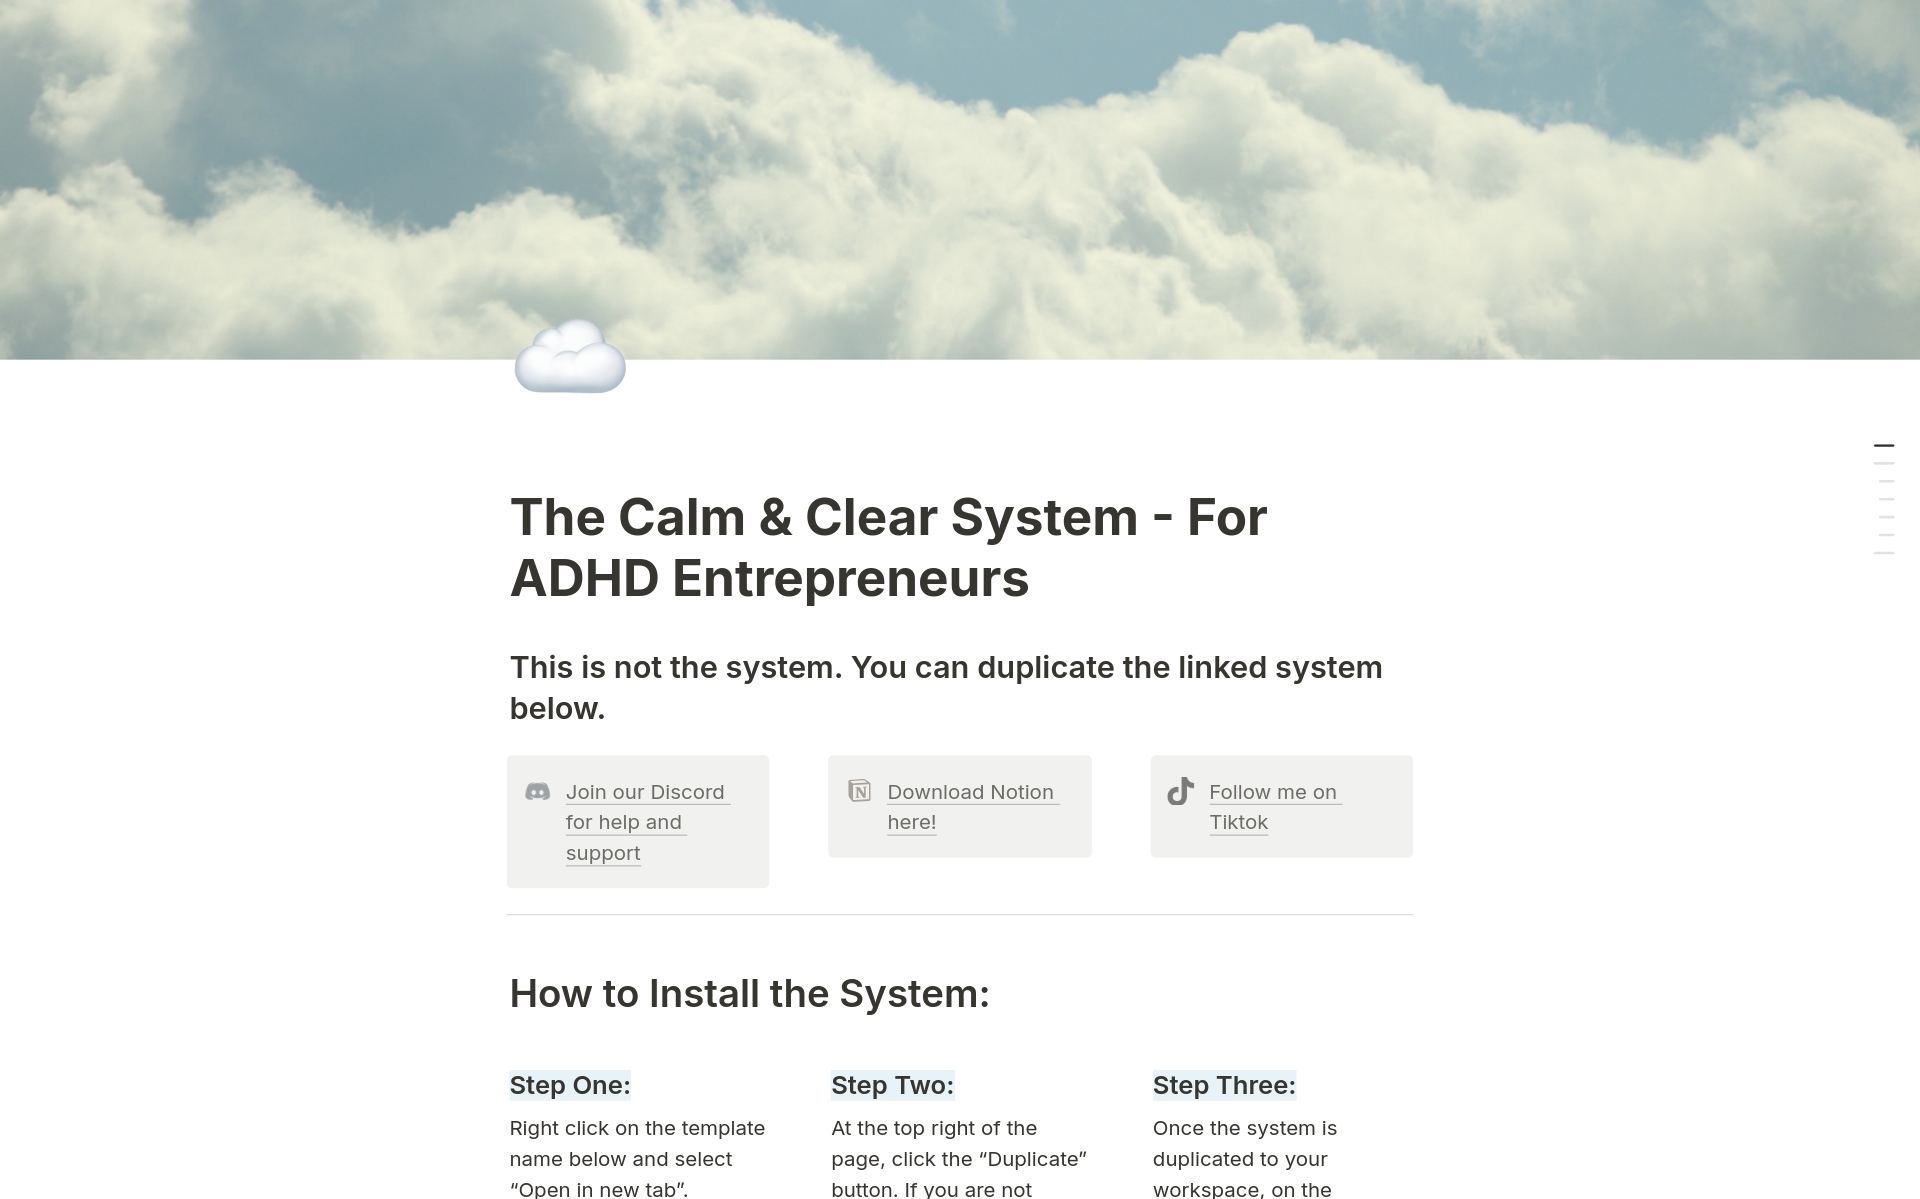 If you're an ADHD business owner seeking clarity, organization, & empowerment in your daily life, the Calm & Clear System is your perfect solution. This system is designed to help you manage your business(es), project, clients, content creation, and personal development with ease